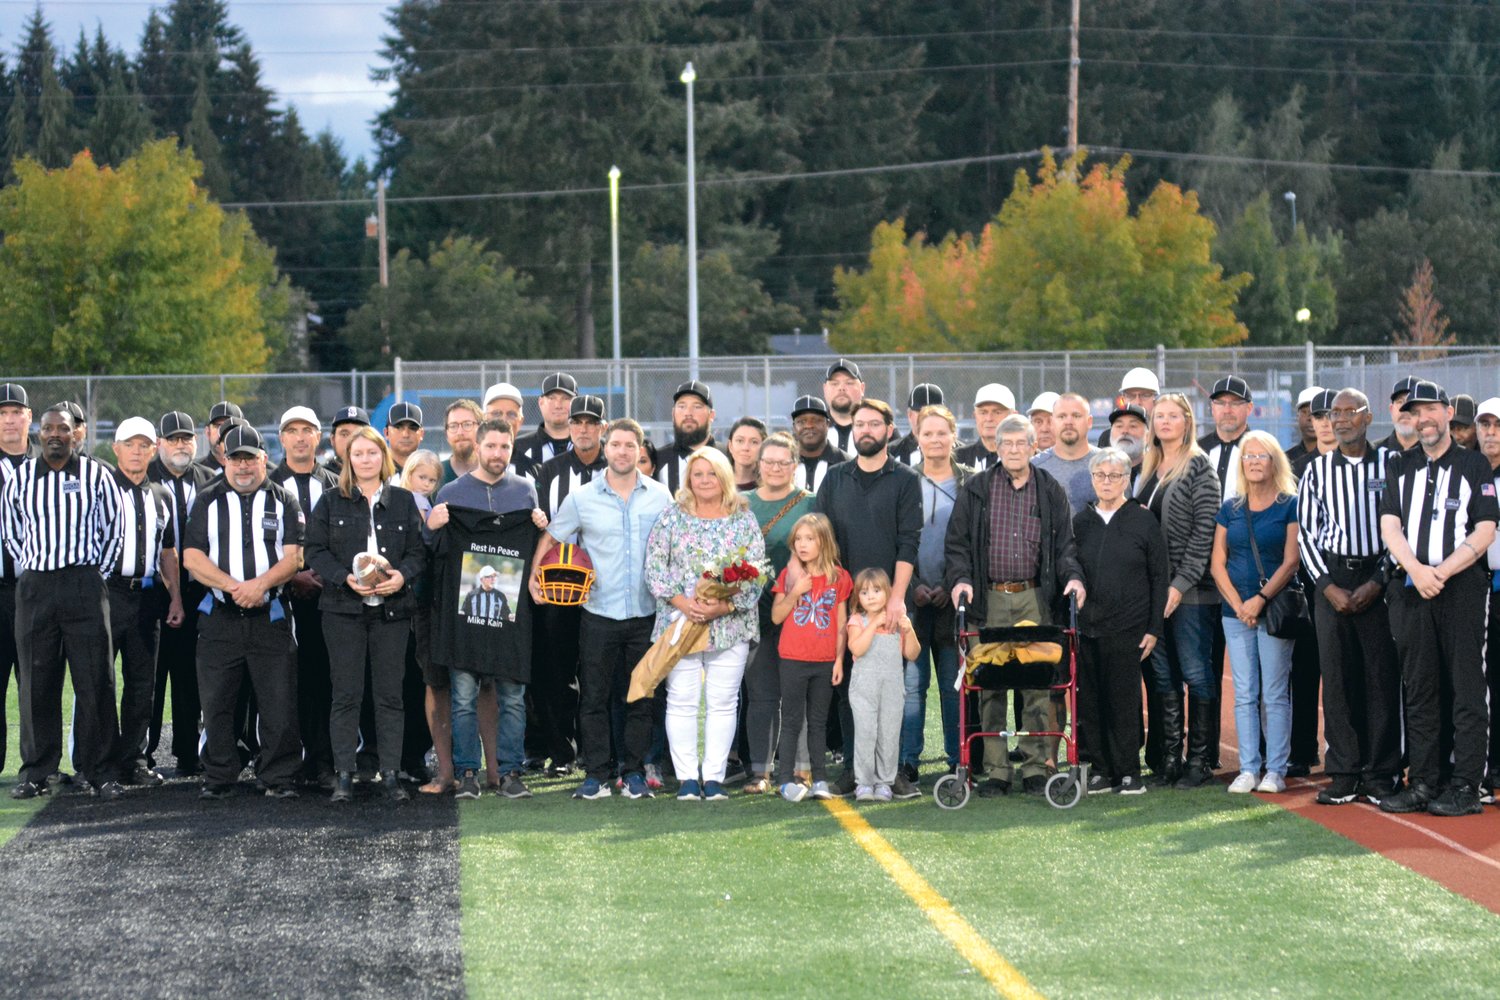 The Kain family poses for a photo with many of their father's colleagues on Sept. 29.